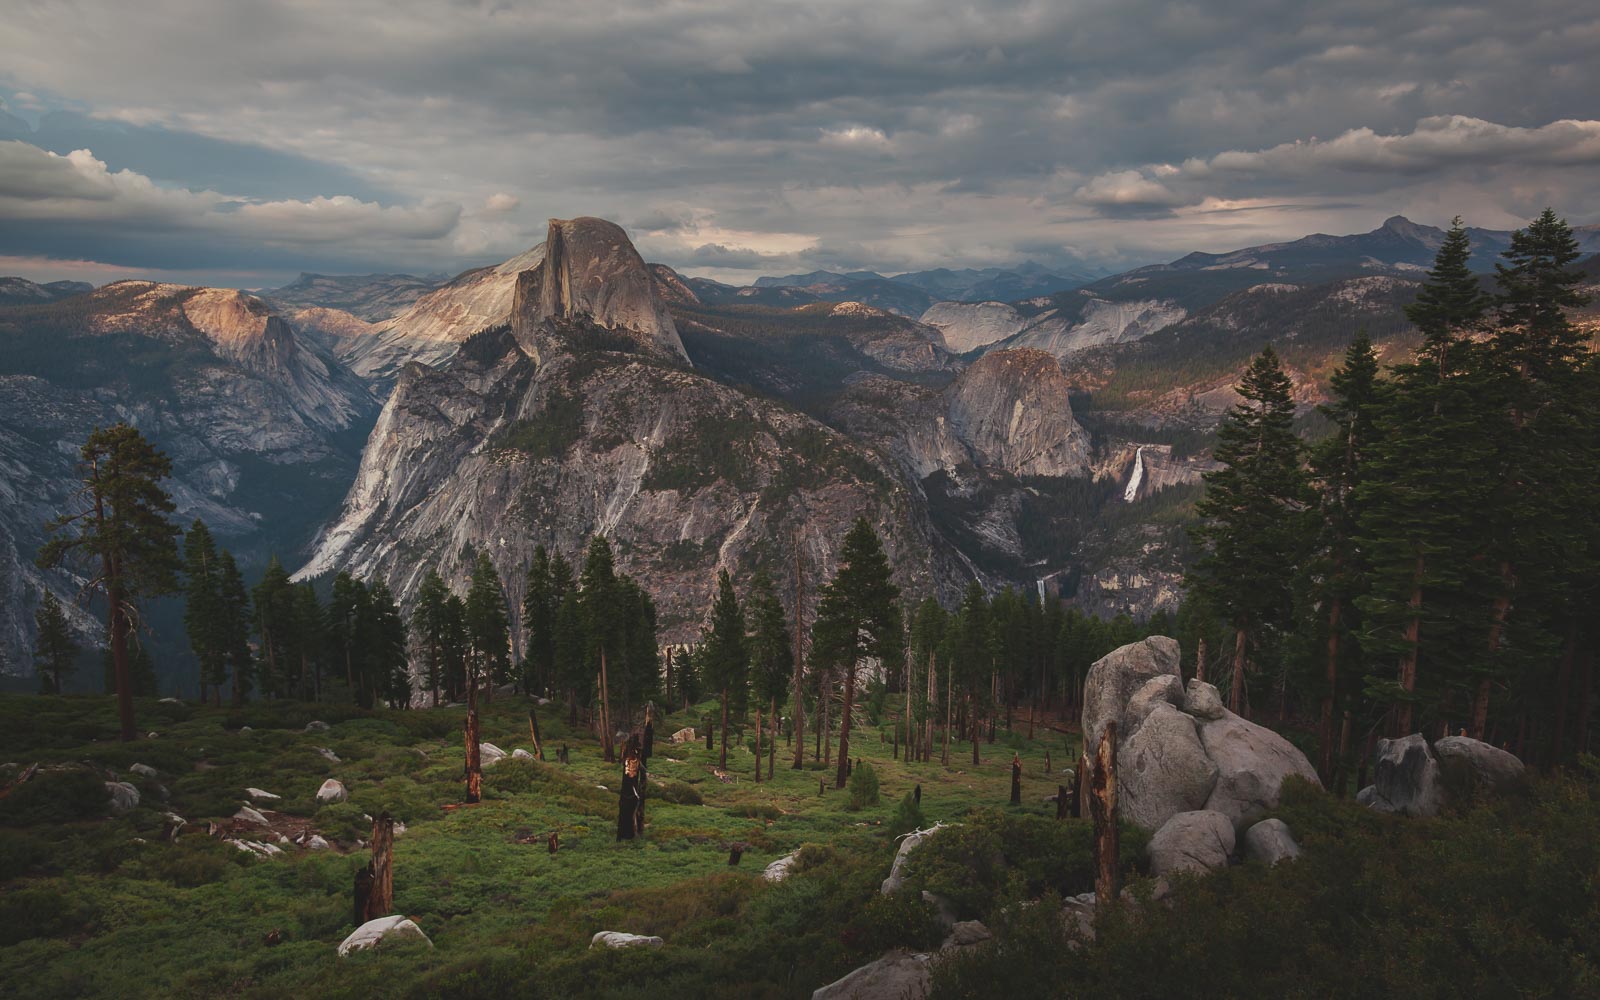 Best Way to see Yosemite National Park